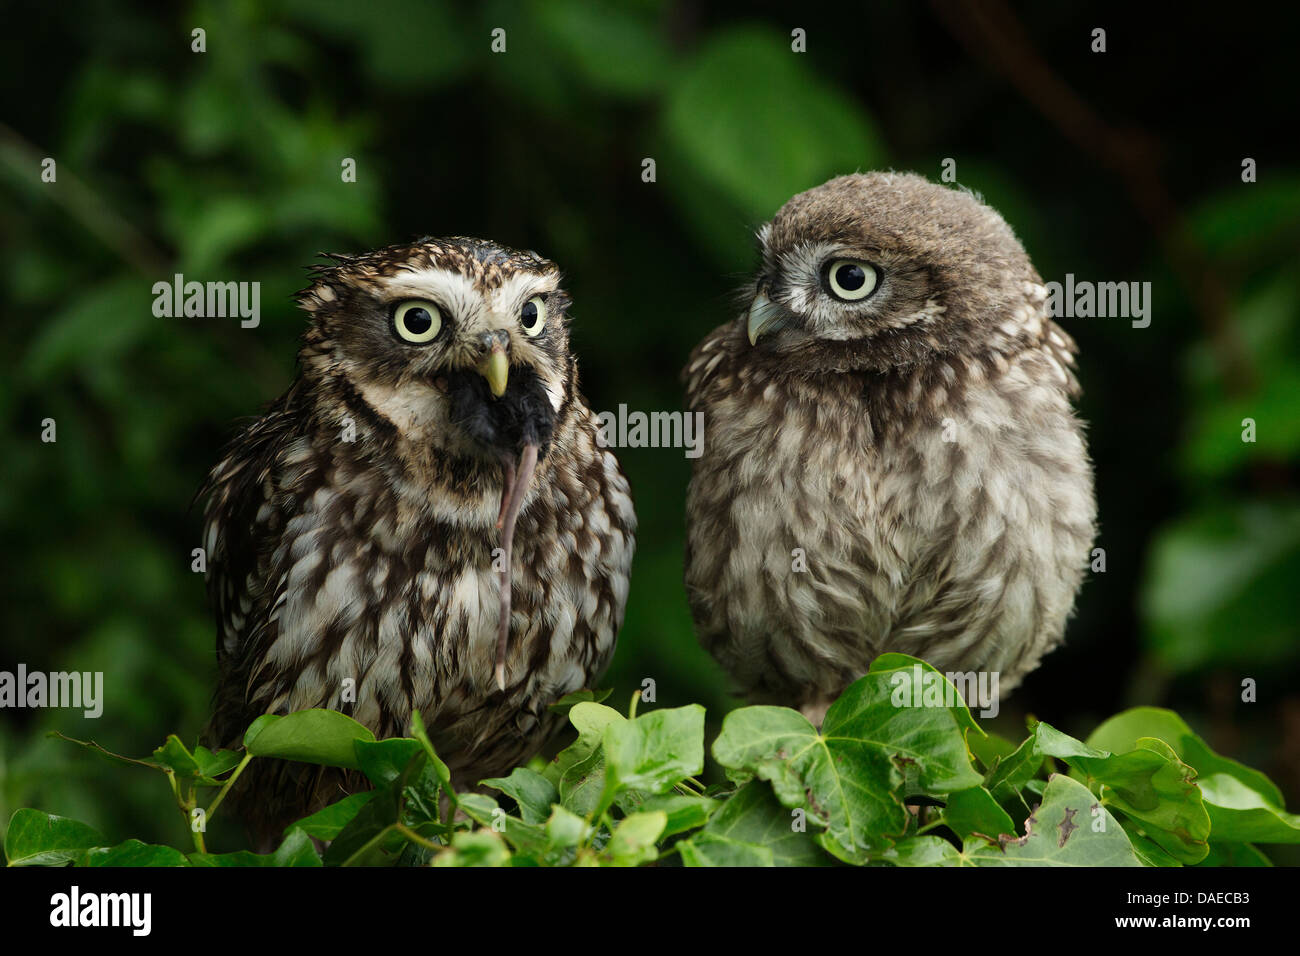 Funny animal photograph of a little owl (Athene Noctua) watching another with a rodent stuffed in its mouth Stock Photo